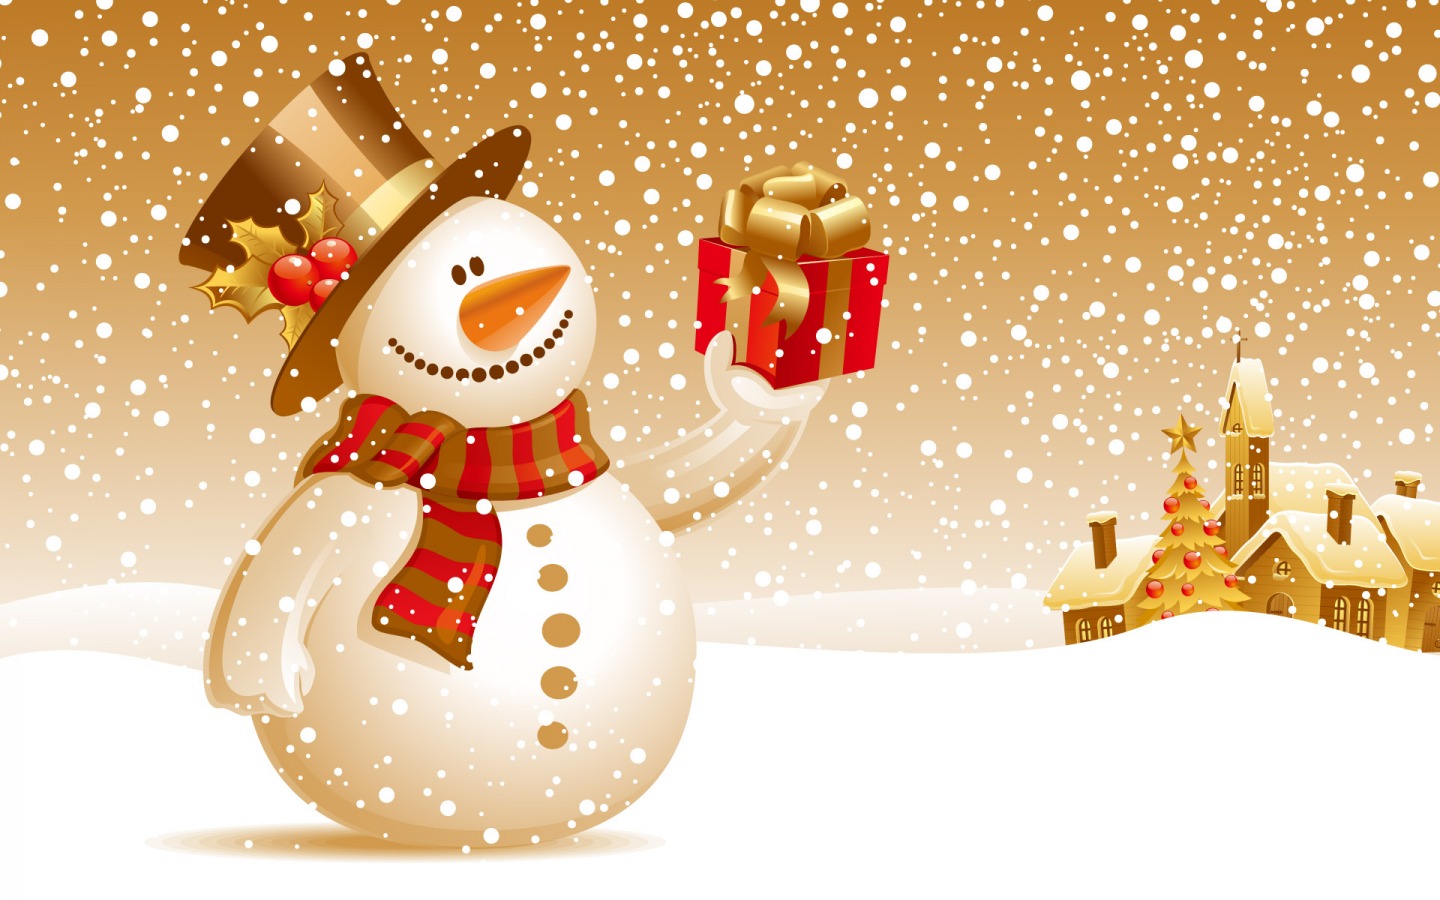 Free Flying Snowman Backgrounds For PowerPoint